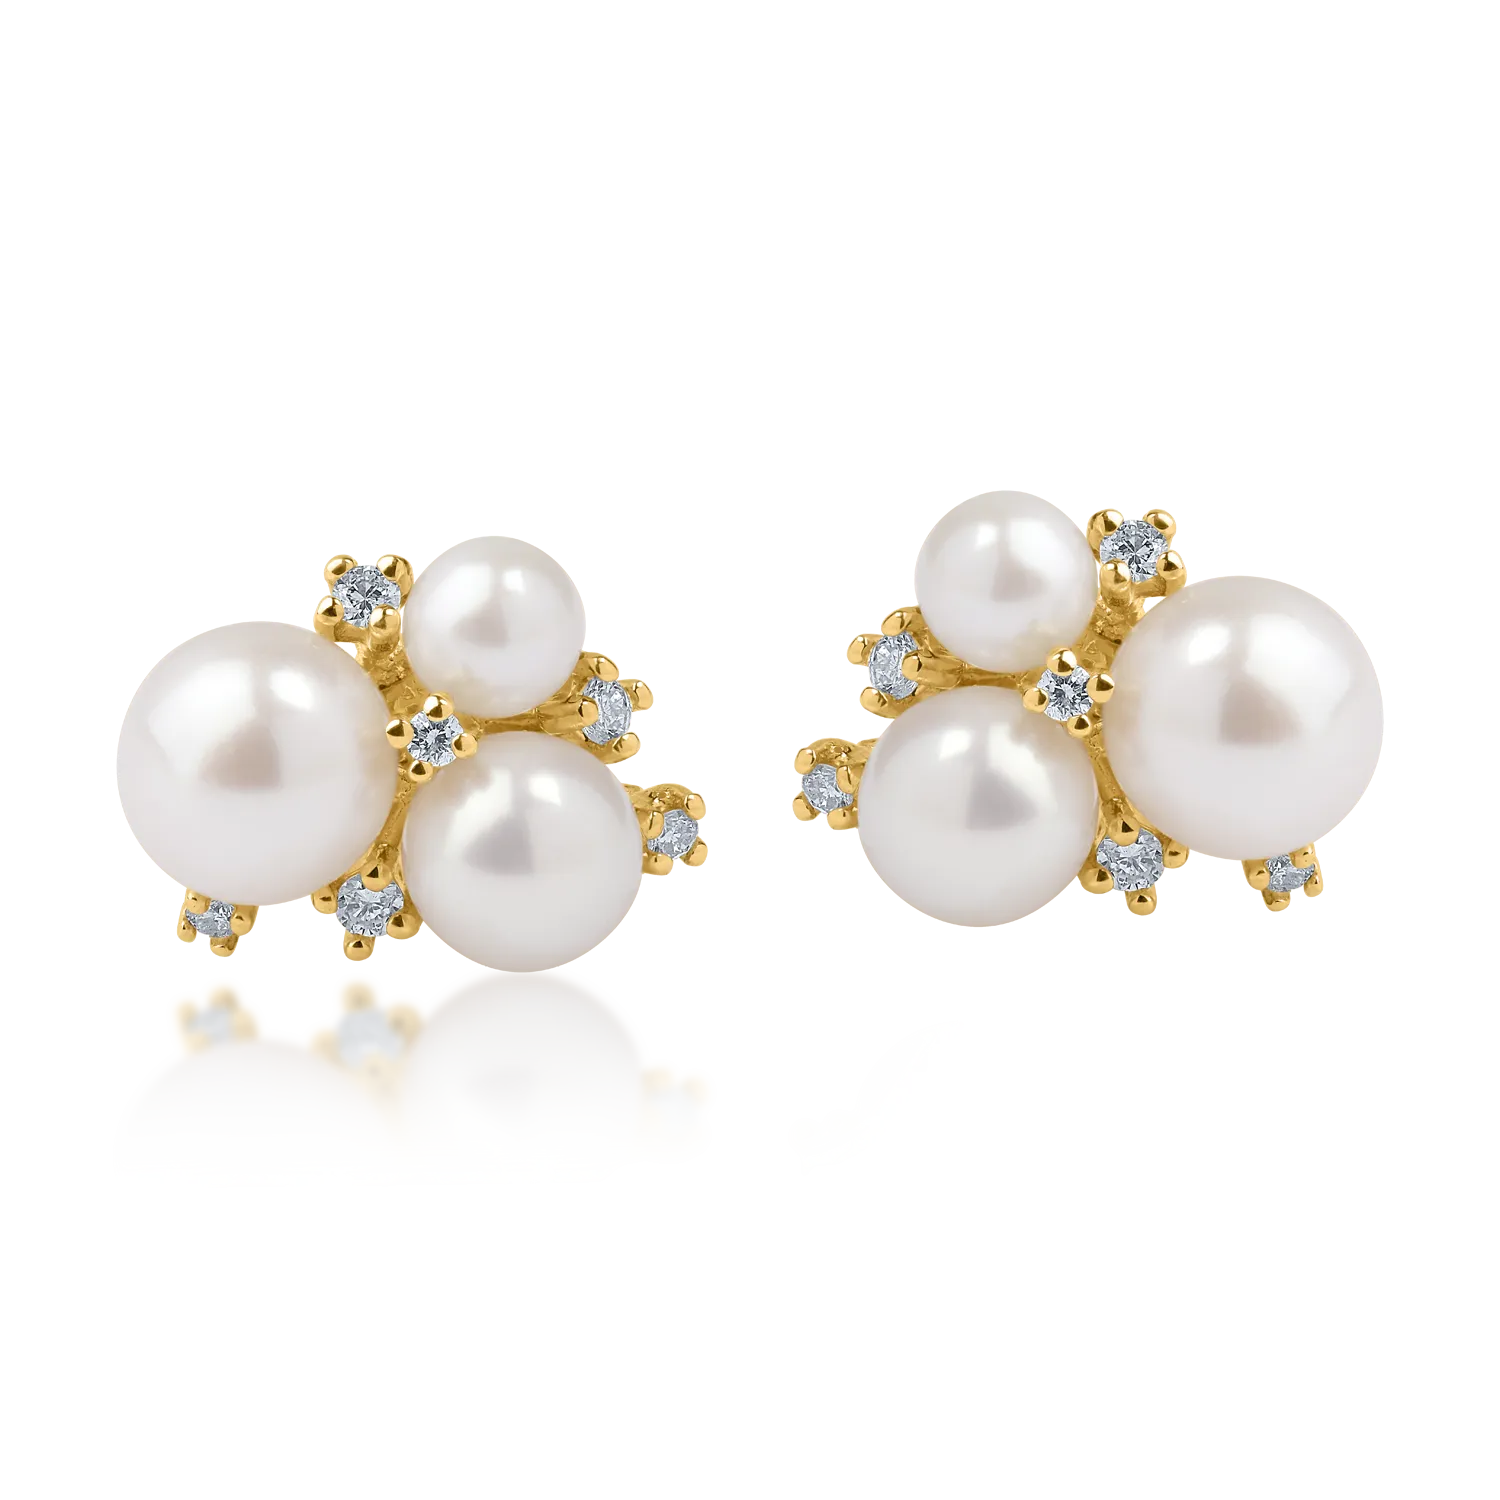 Yellow gold earrings with 6.4ct fresh water pearls and 0.1ct diamonds